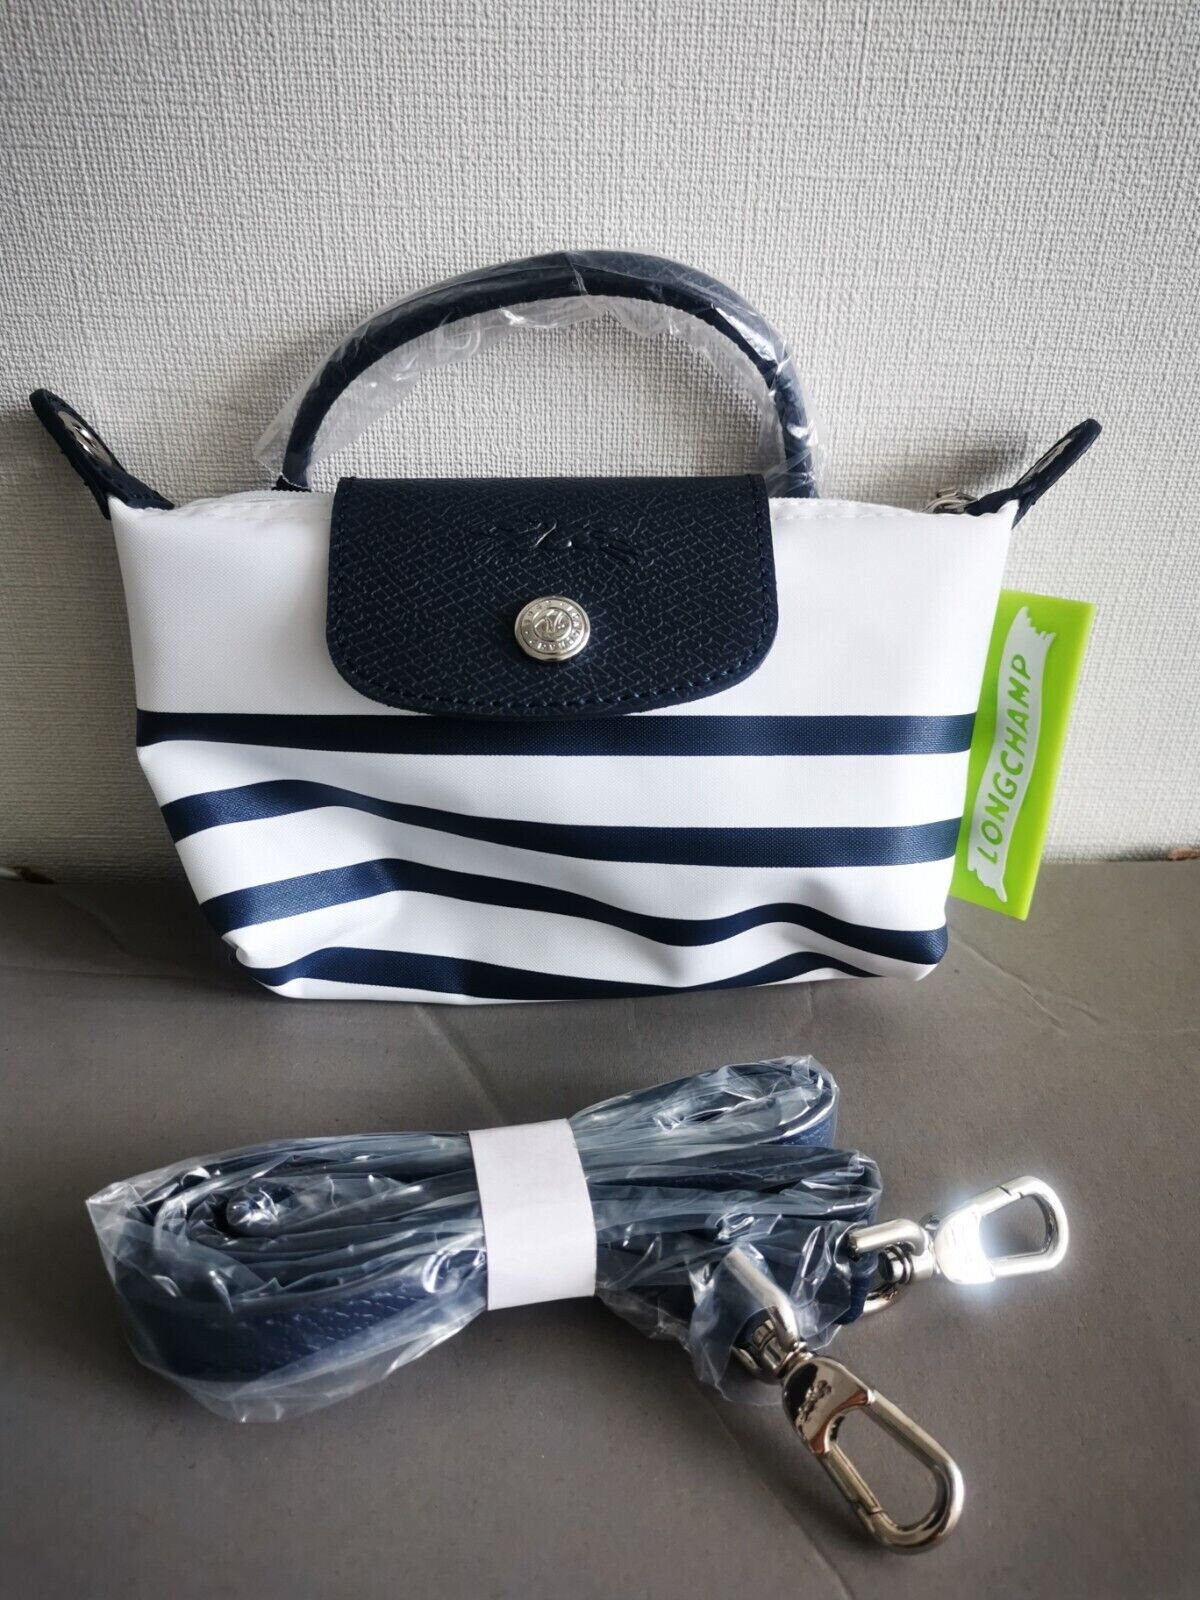 Pre-Loved Longchamp Mini Pouch handle with original strap Navy color